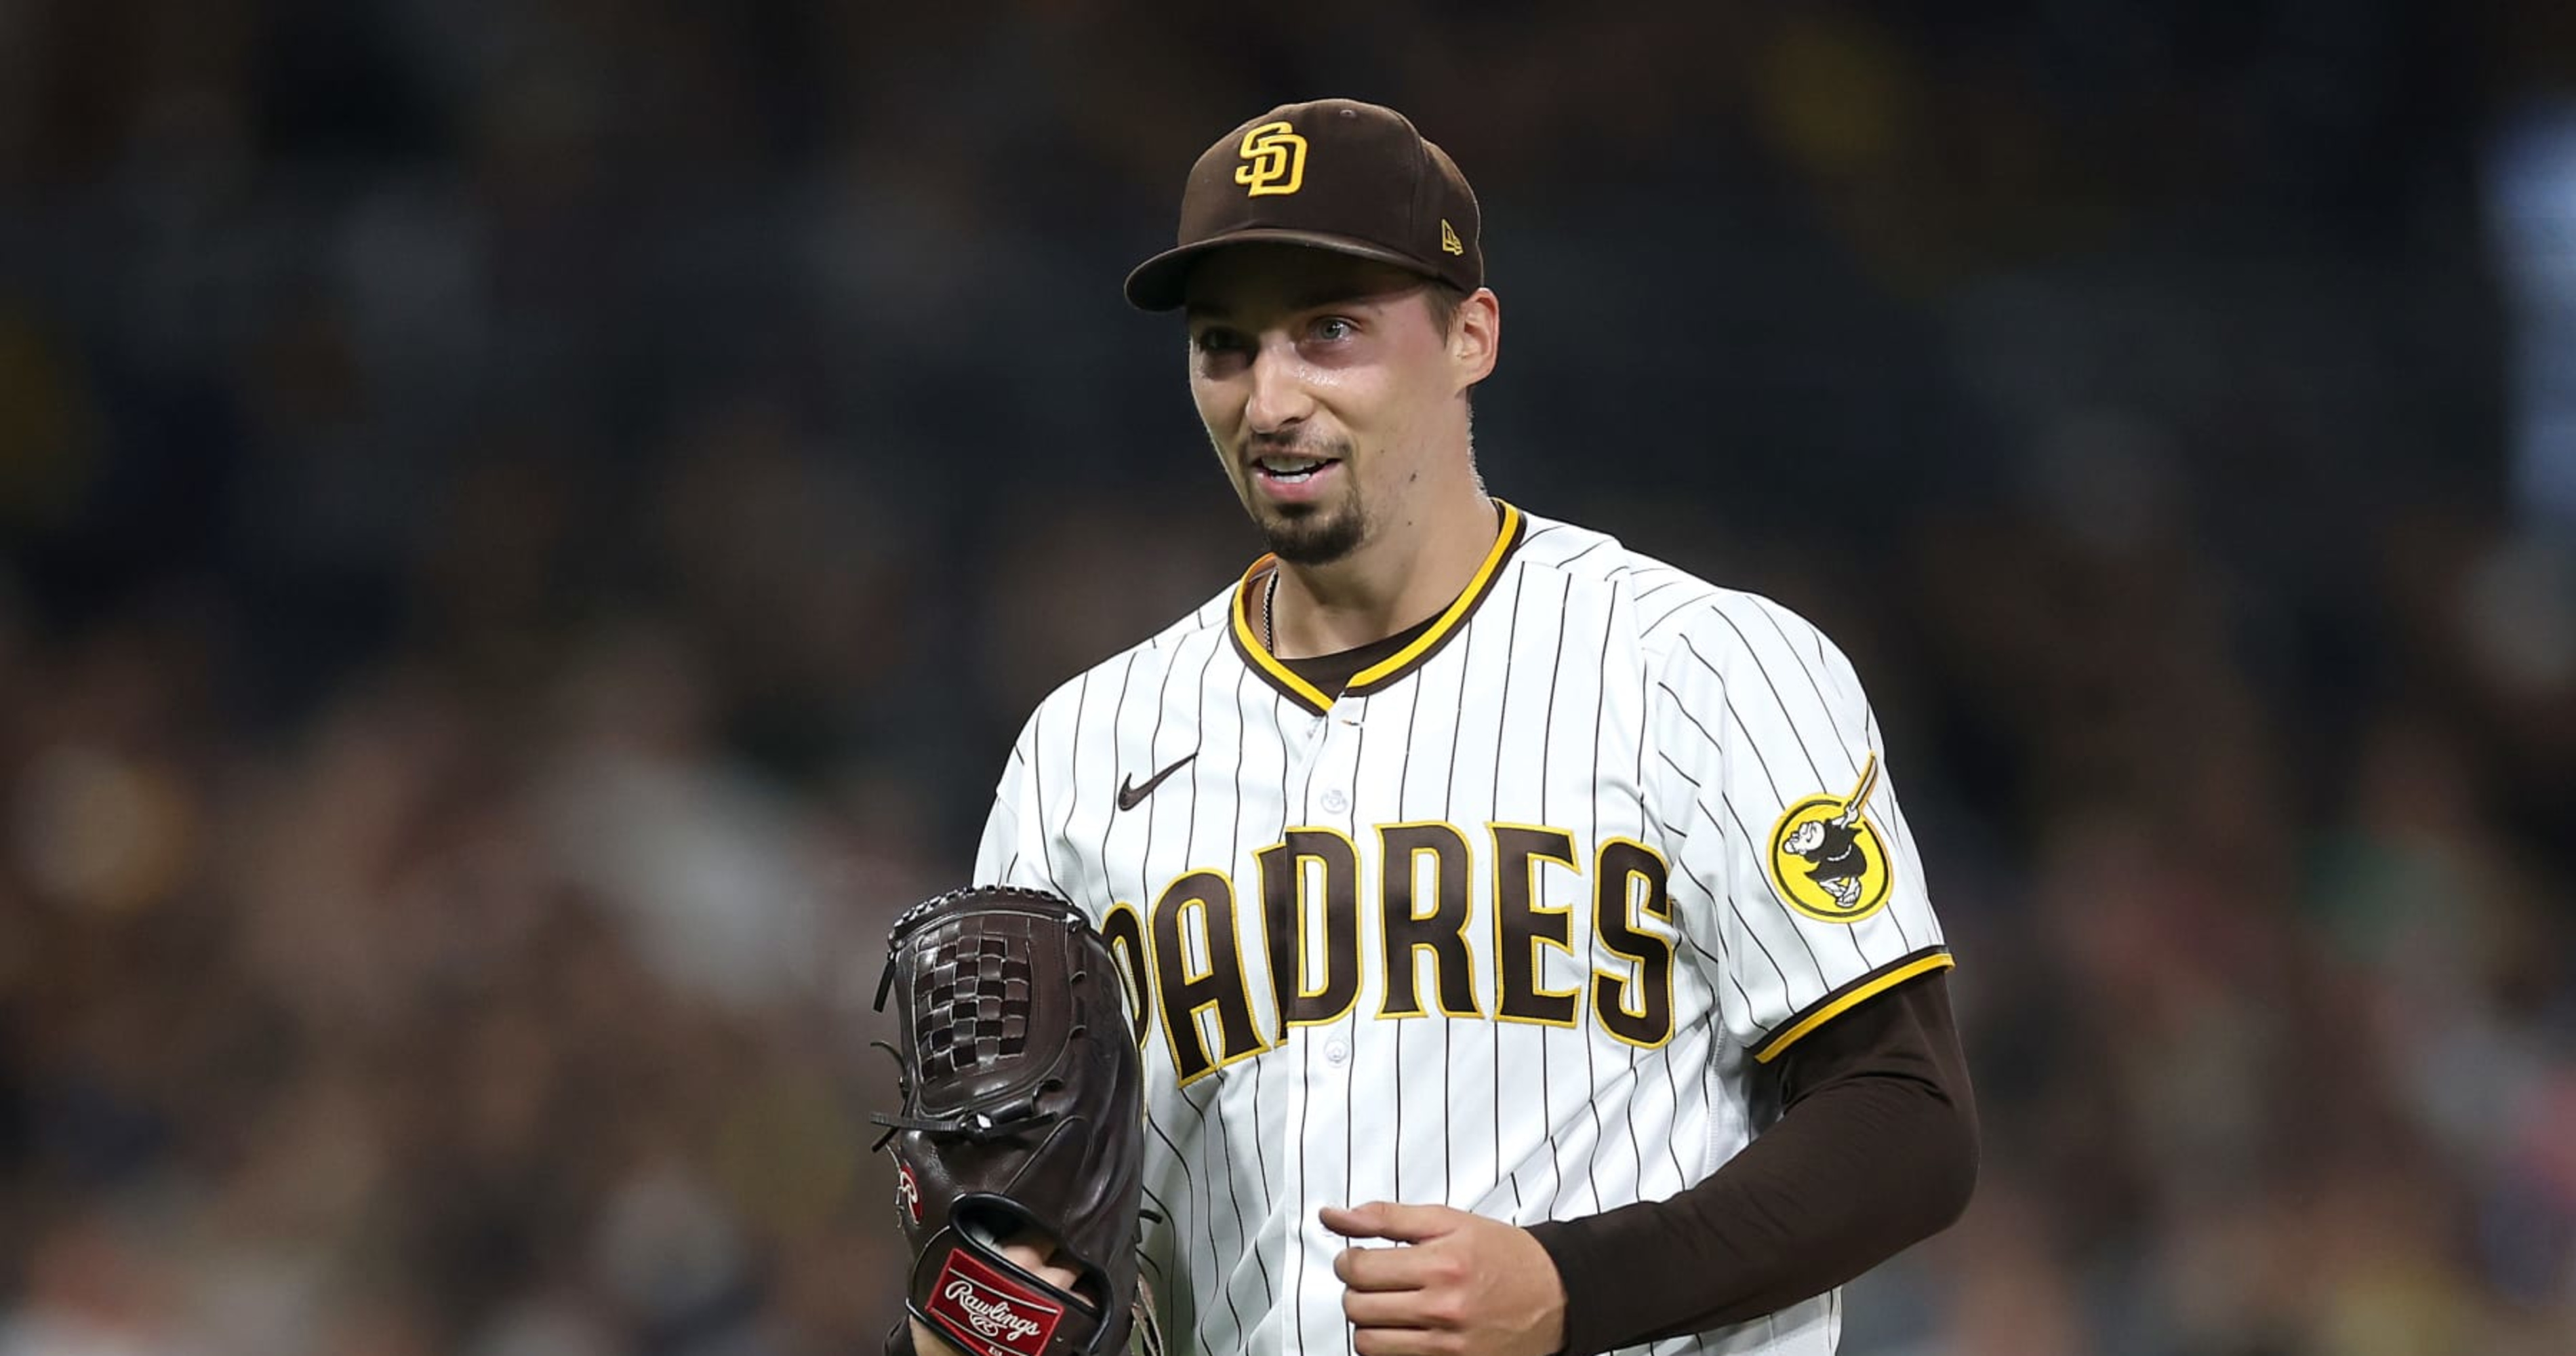 Did Blake Snell and Co. overplay hand in free agency – or is drought MLB's new normal?